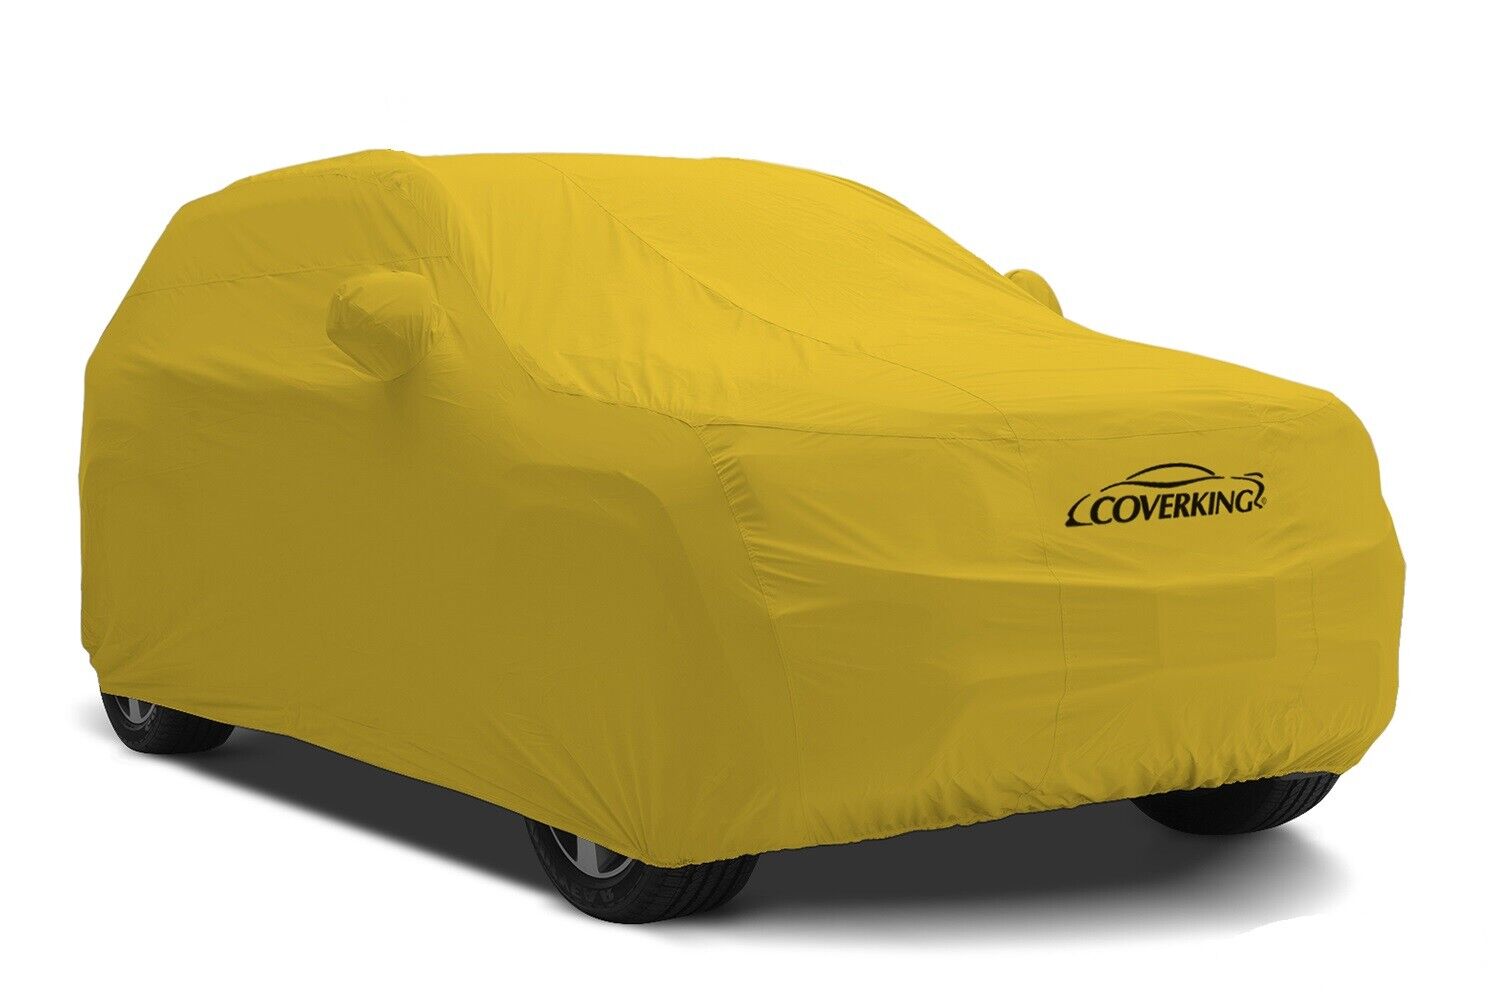 Coverking Premium Stormproof All-Weather Tailored Car Cover for Porsche Macan